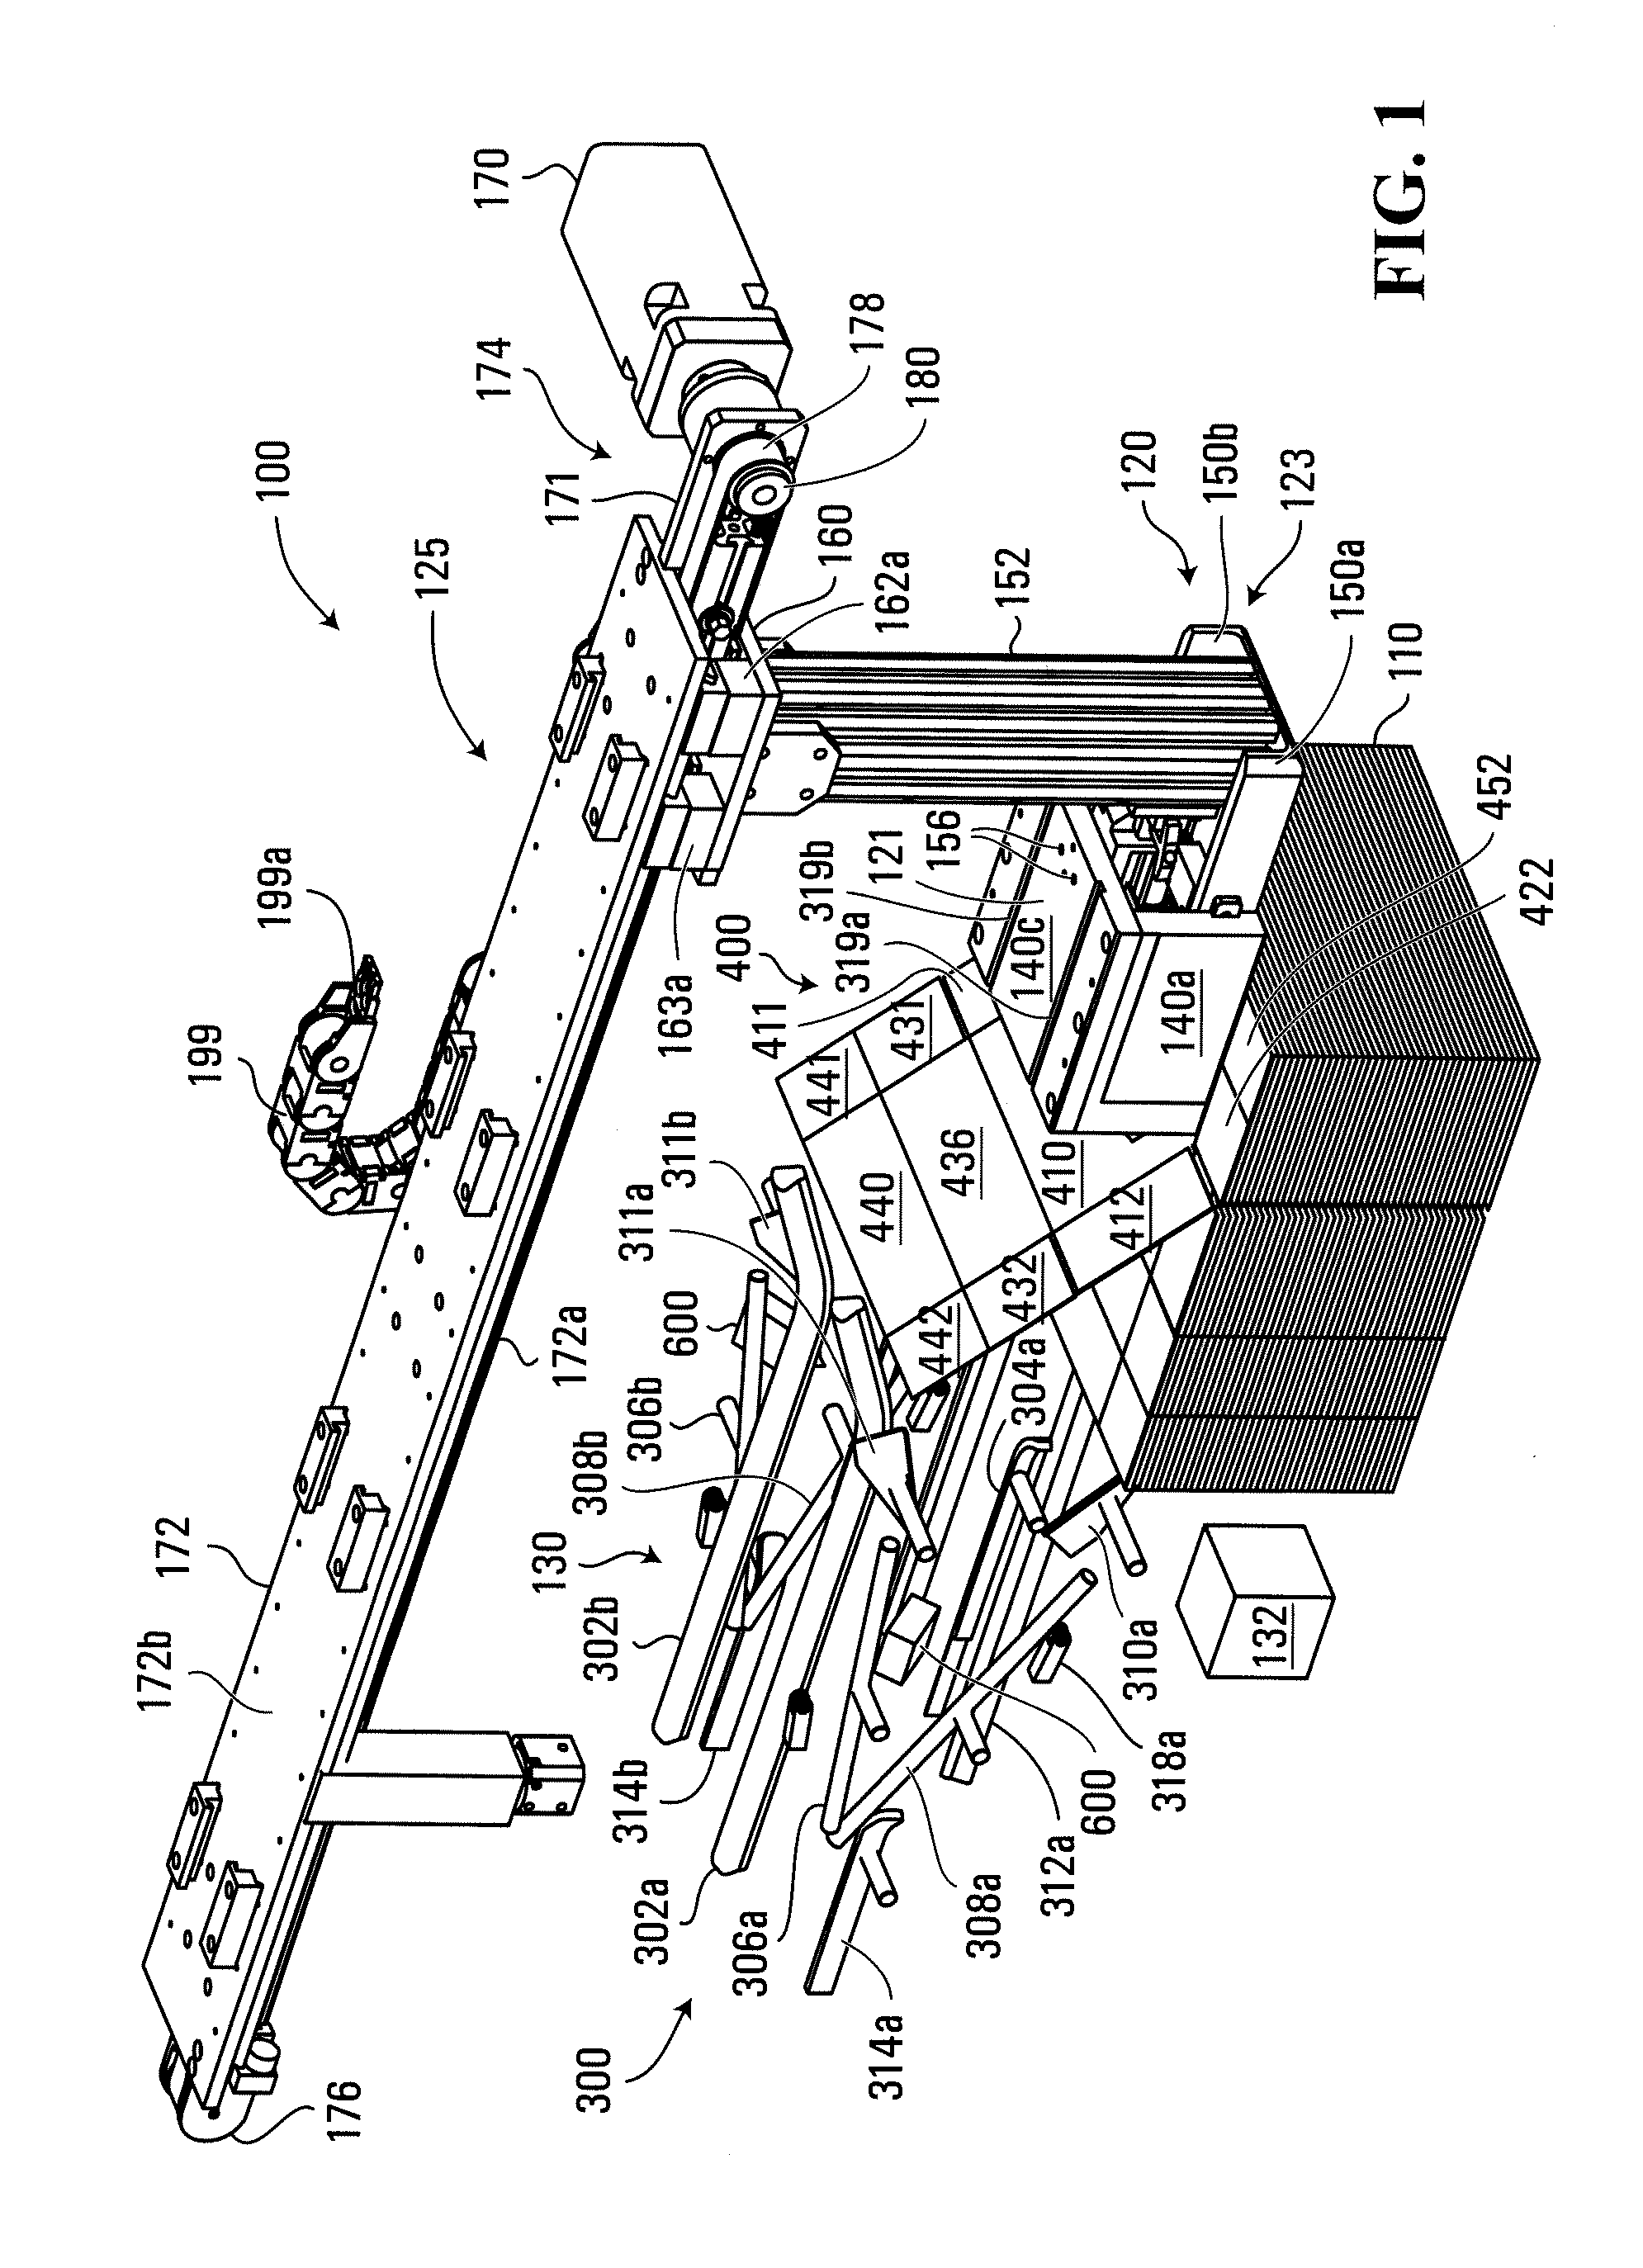 Method and apparatus for forming containers with corrugated material